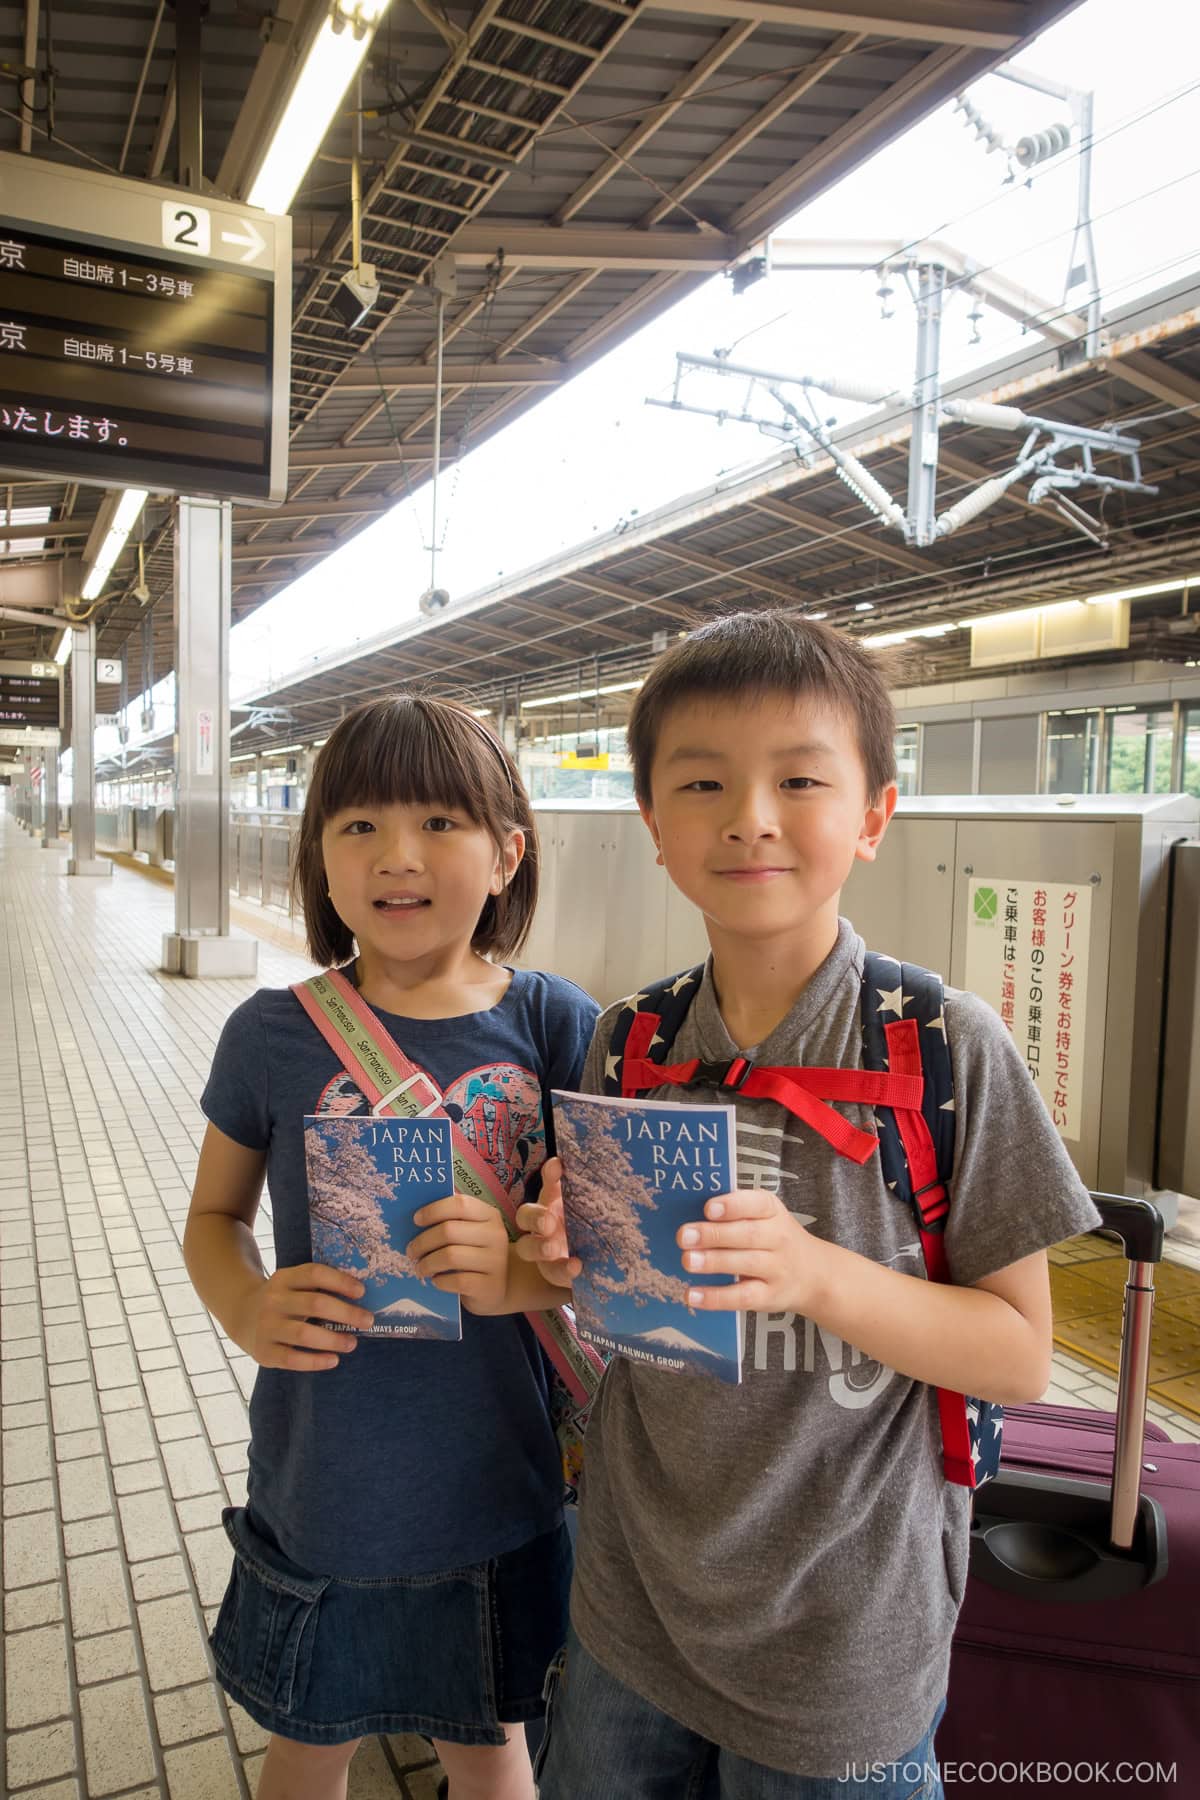 a boy and a girl holding JR Pass